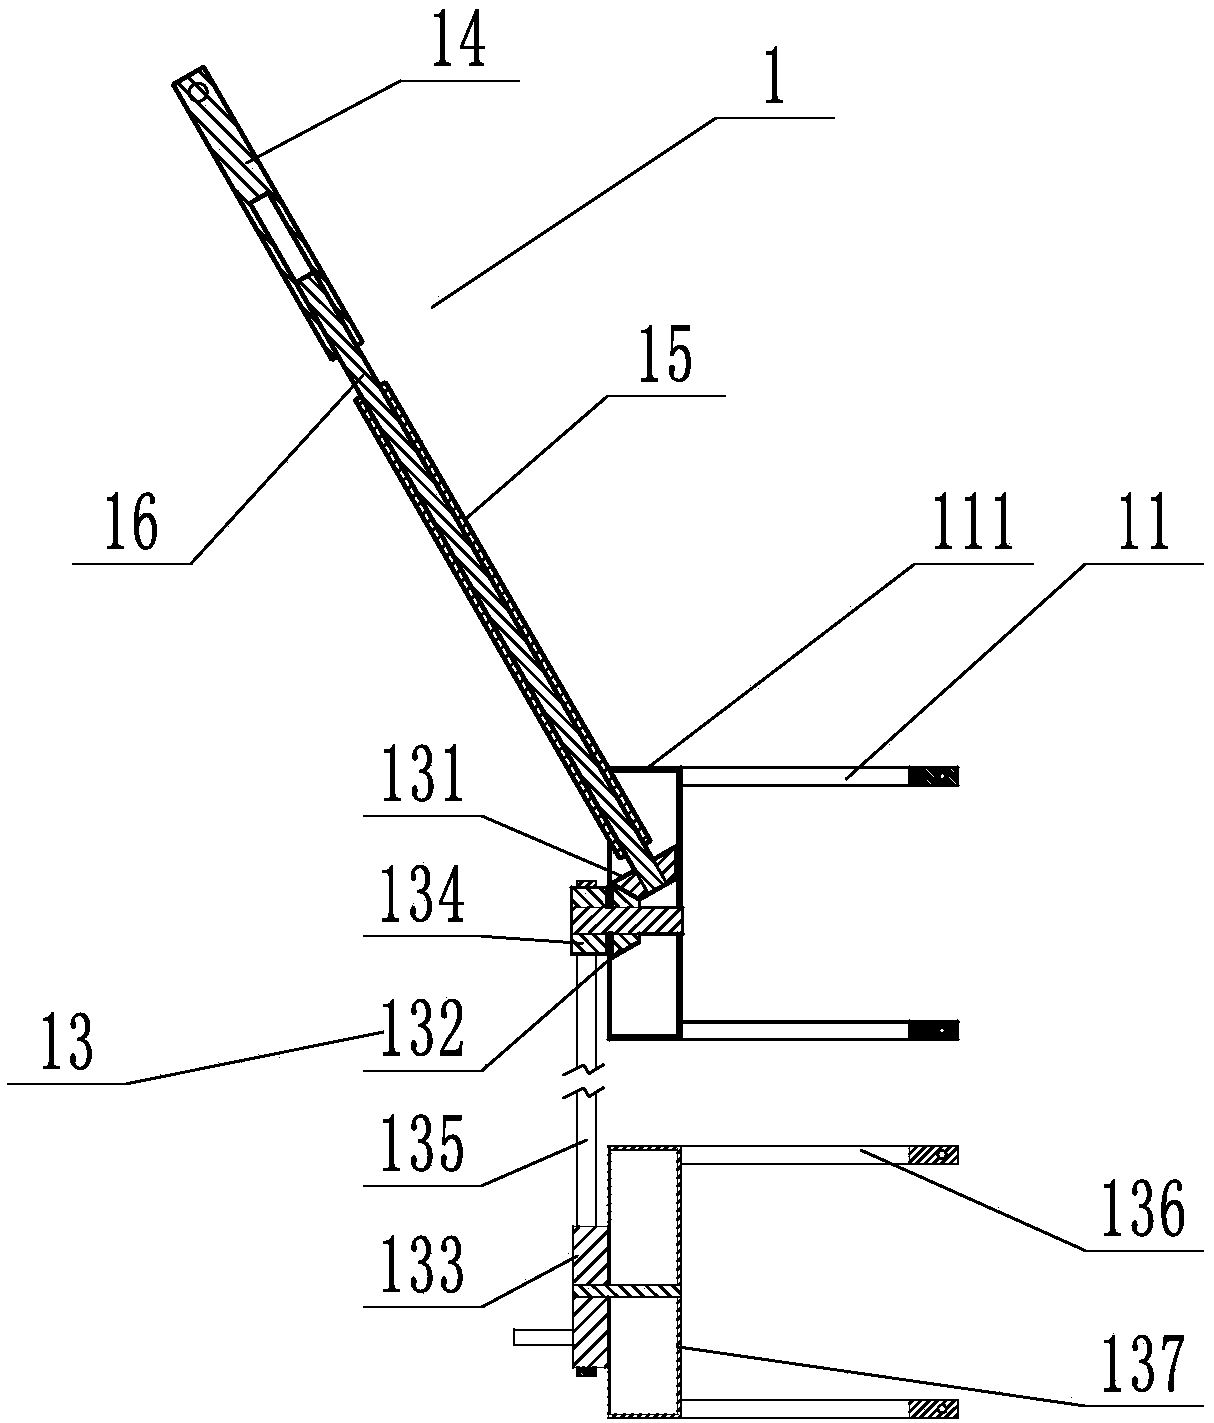 A Simple Pole Mounted Transformer Lifting Device